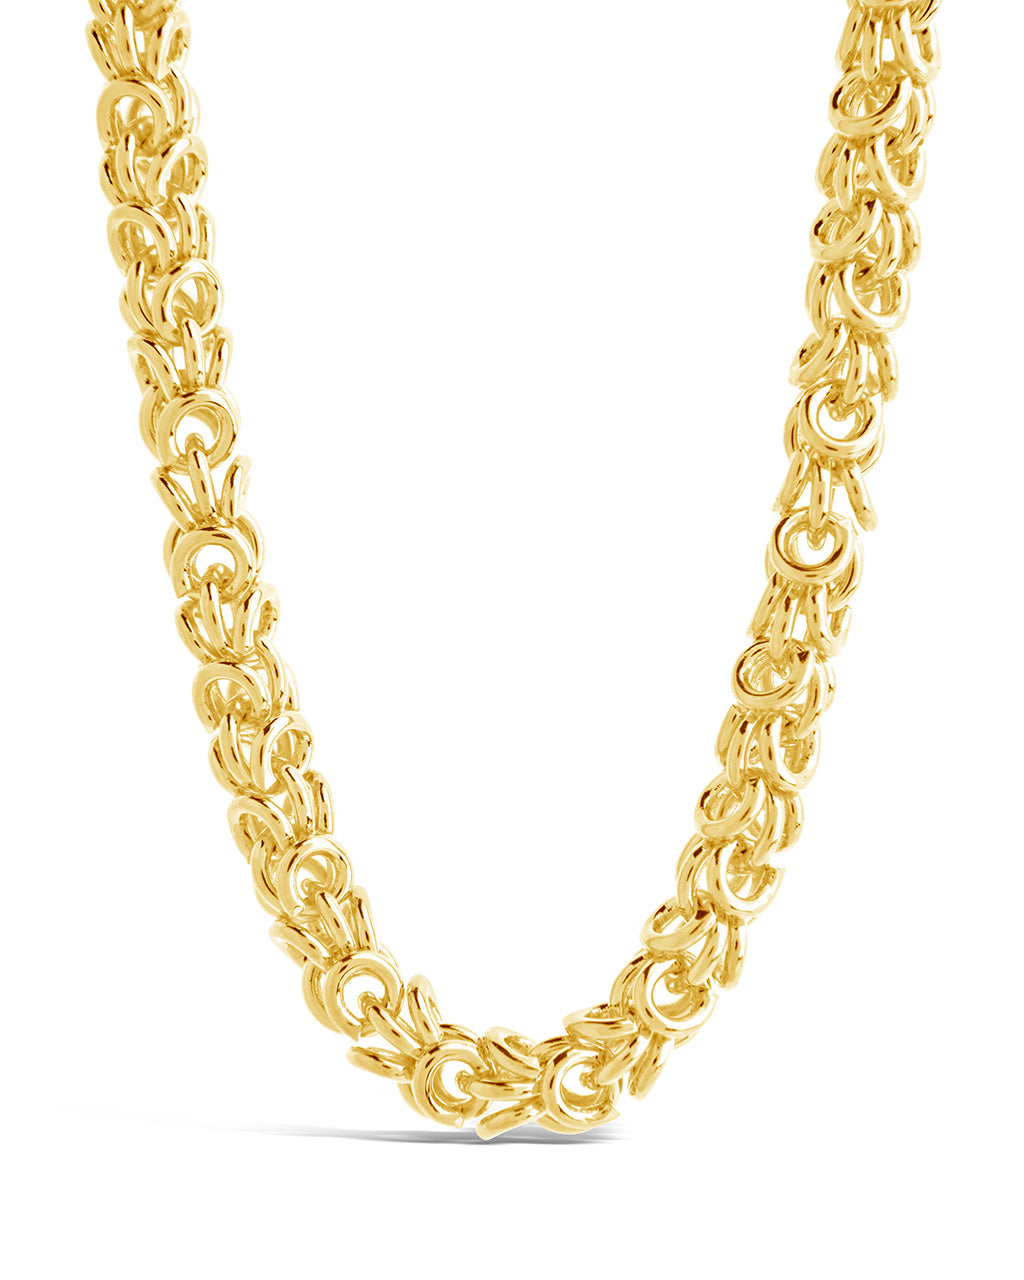 Moira Chain Necklace Sterling Forever 